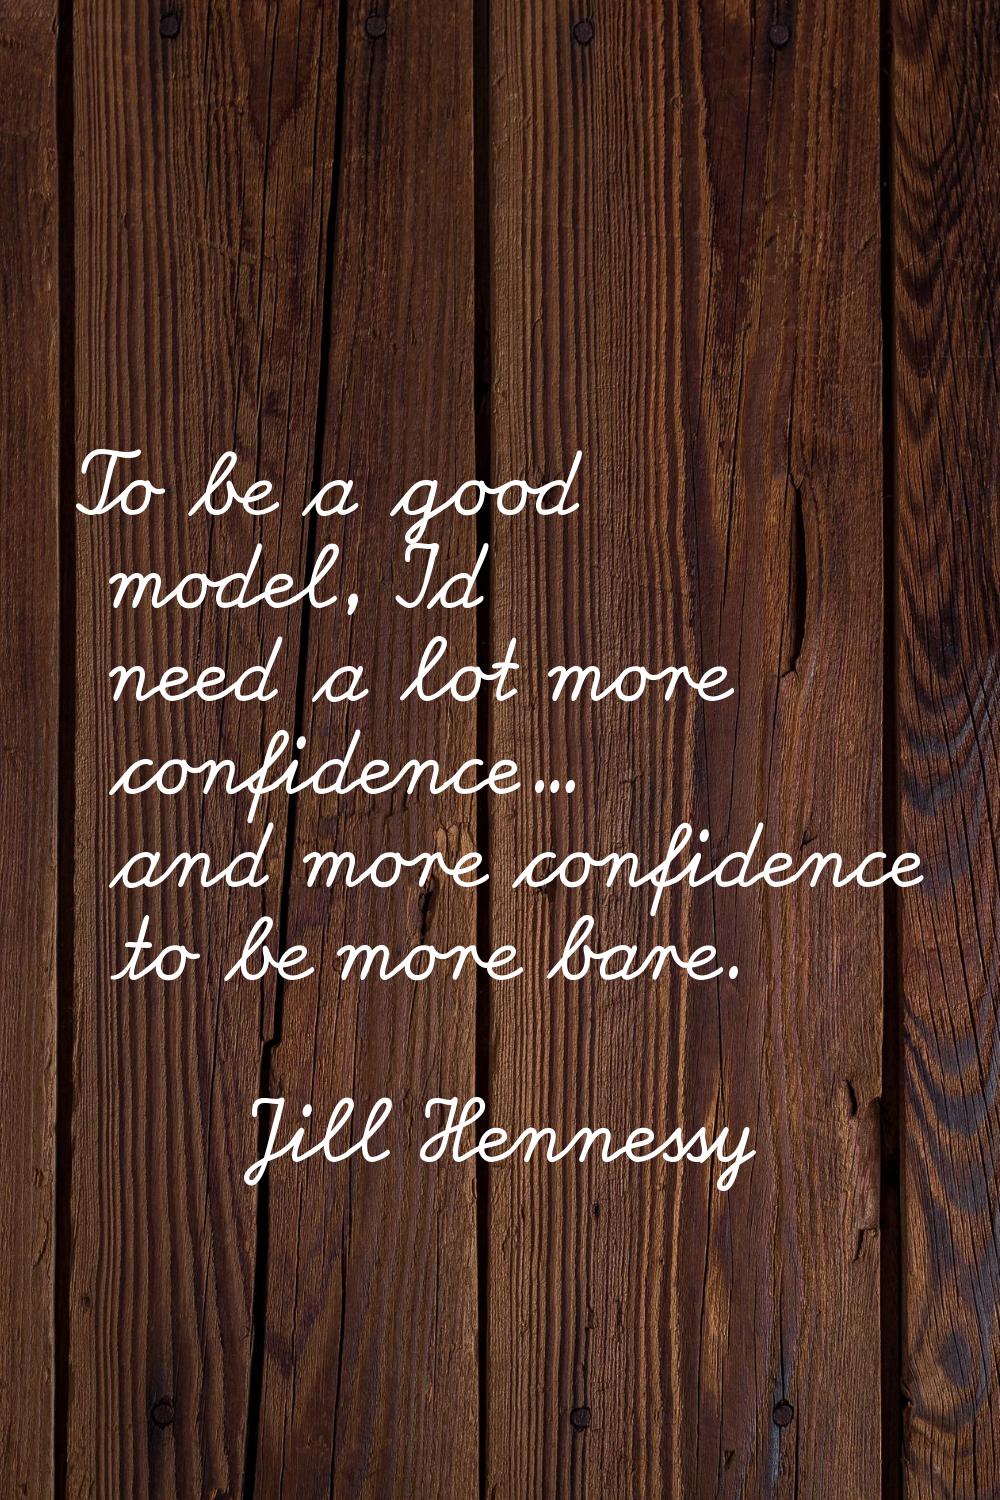 To be a good model, I'd need a lot more confidence... and more confidence to be more bare.